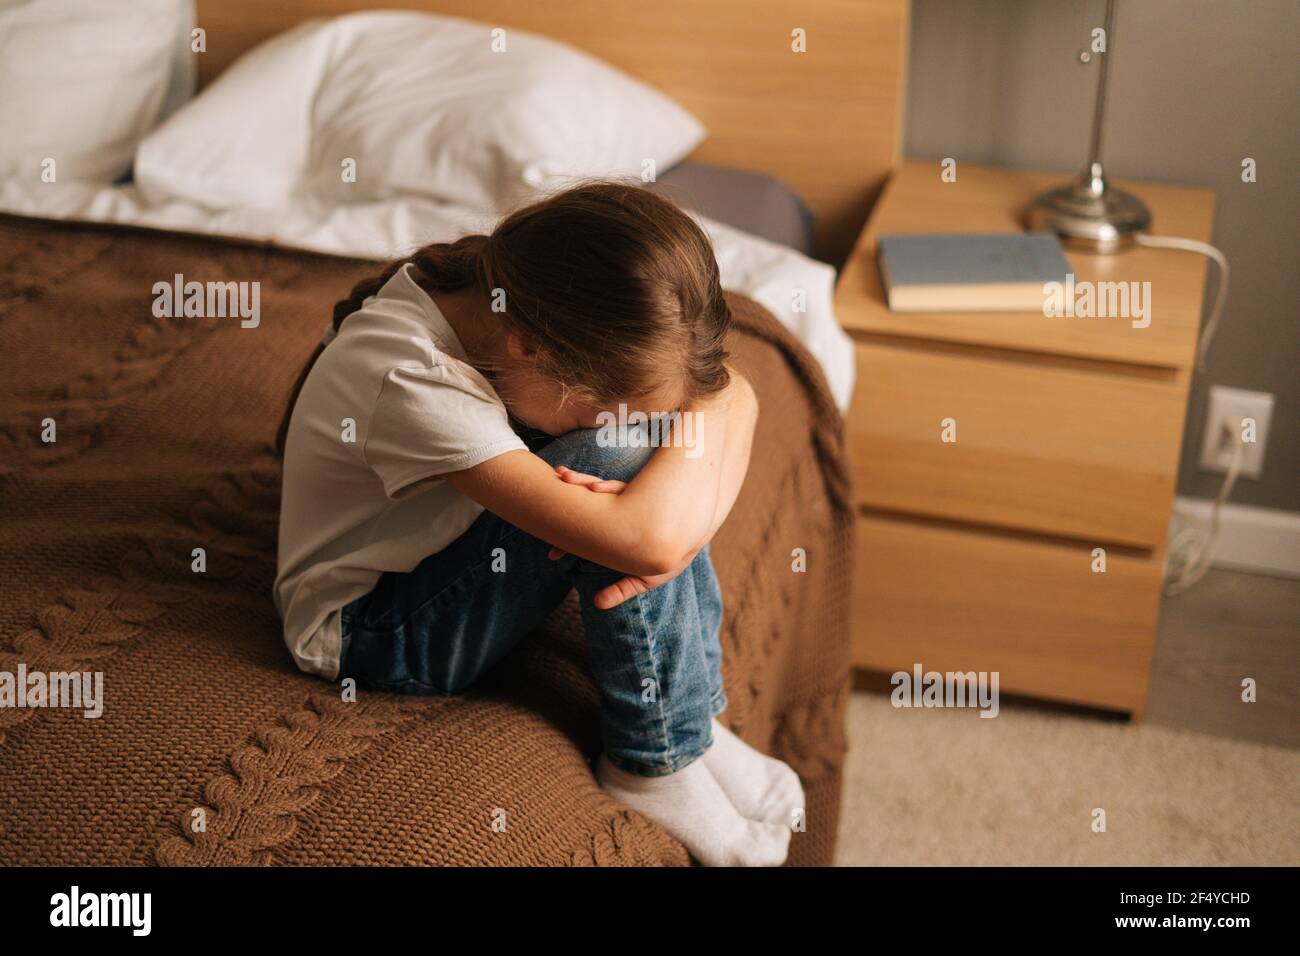 Top view of upset little girl hugging knee, sobbing with head bowed and crying sitting alone on bed in bedroom. Stock Photo